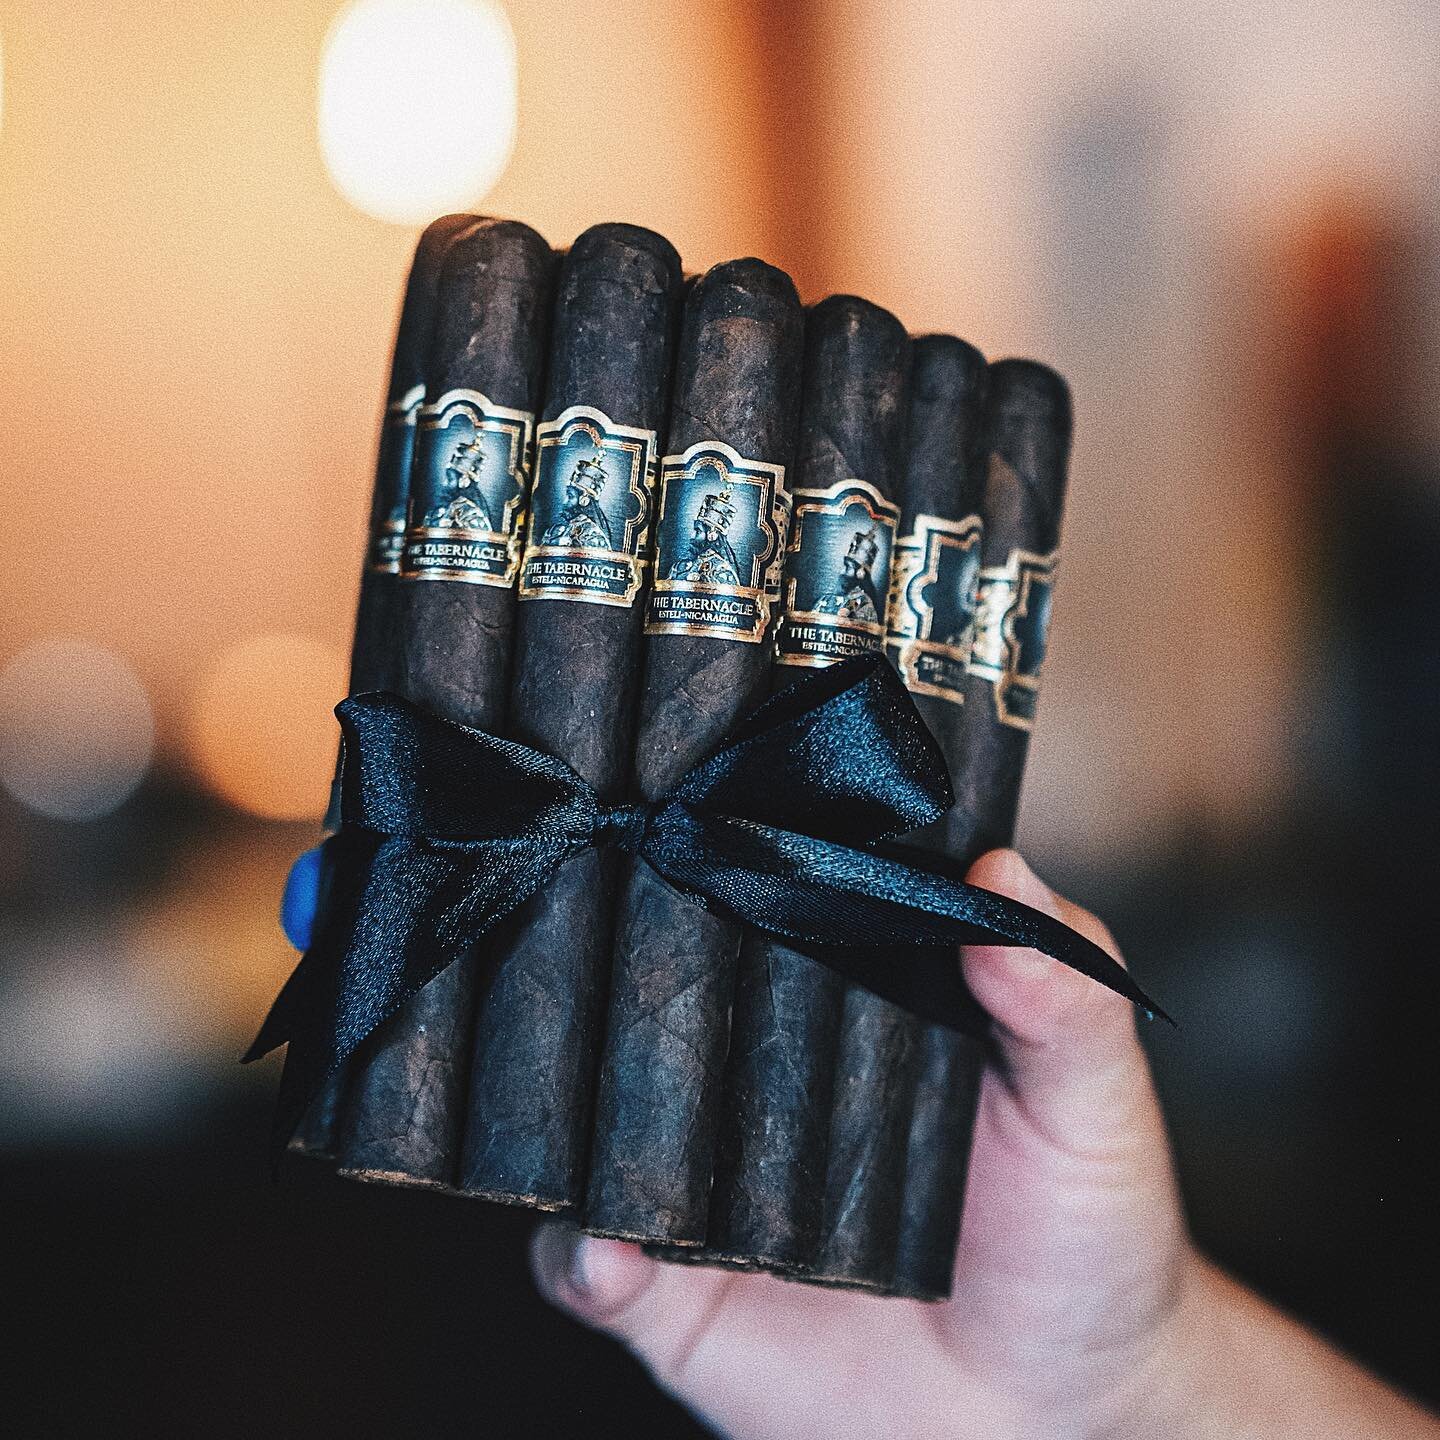 Treat yourself to The Tabernacle from @foundationcigars 🤤